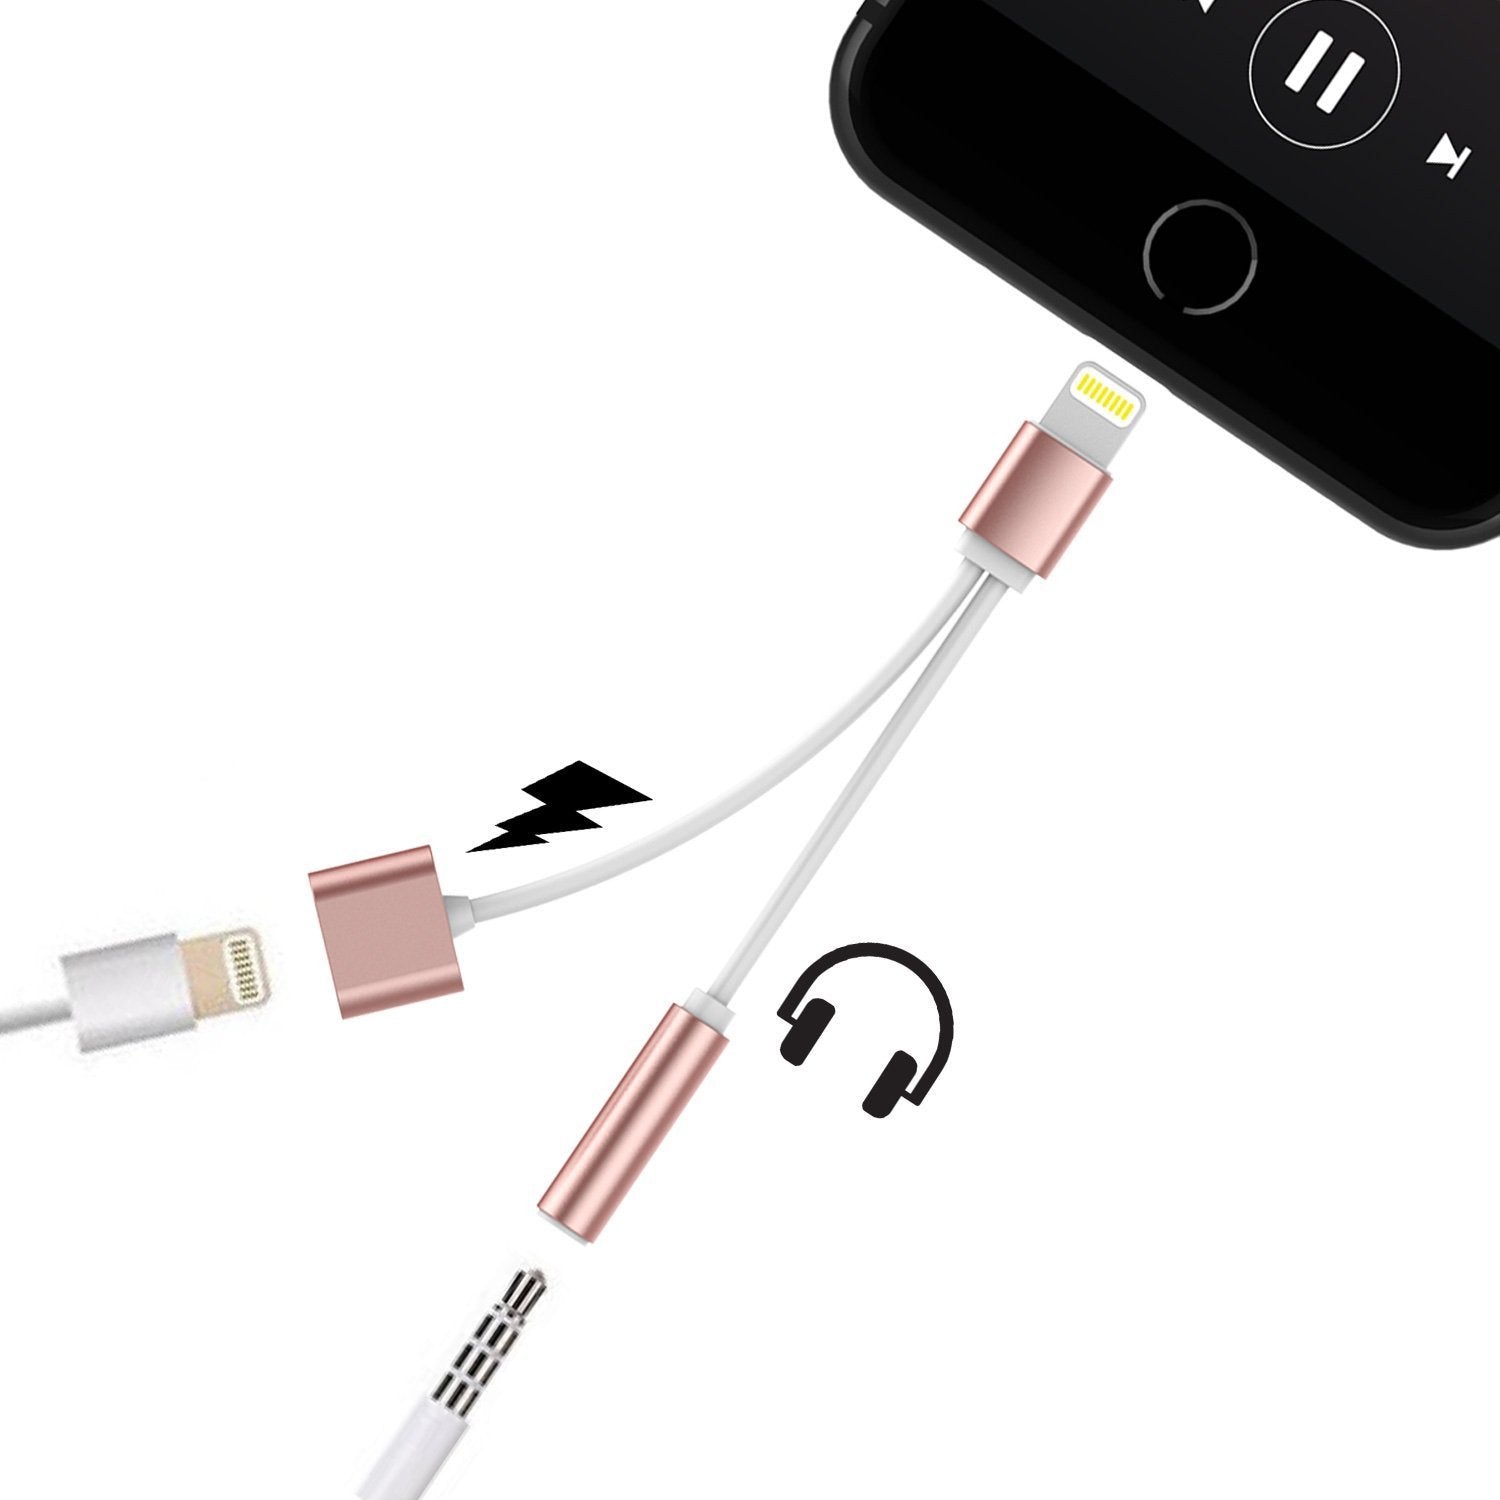 PUNKZAP Lightning Adapter Cable 2 in 1 Splitter Charger with 3.5mm Earphone AUX Jack|Charge & Listen to your Apple iPhone X/8/7/6s/6/5s/5 8+/7+/6+/6S+ Plus [ROSE]